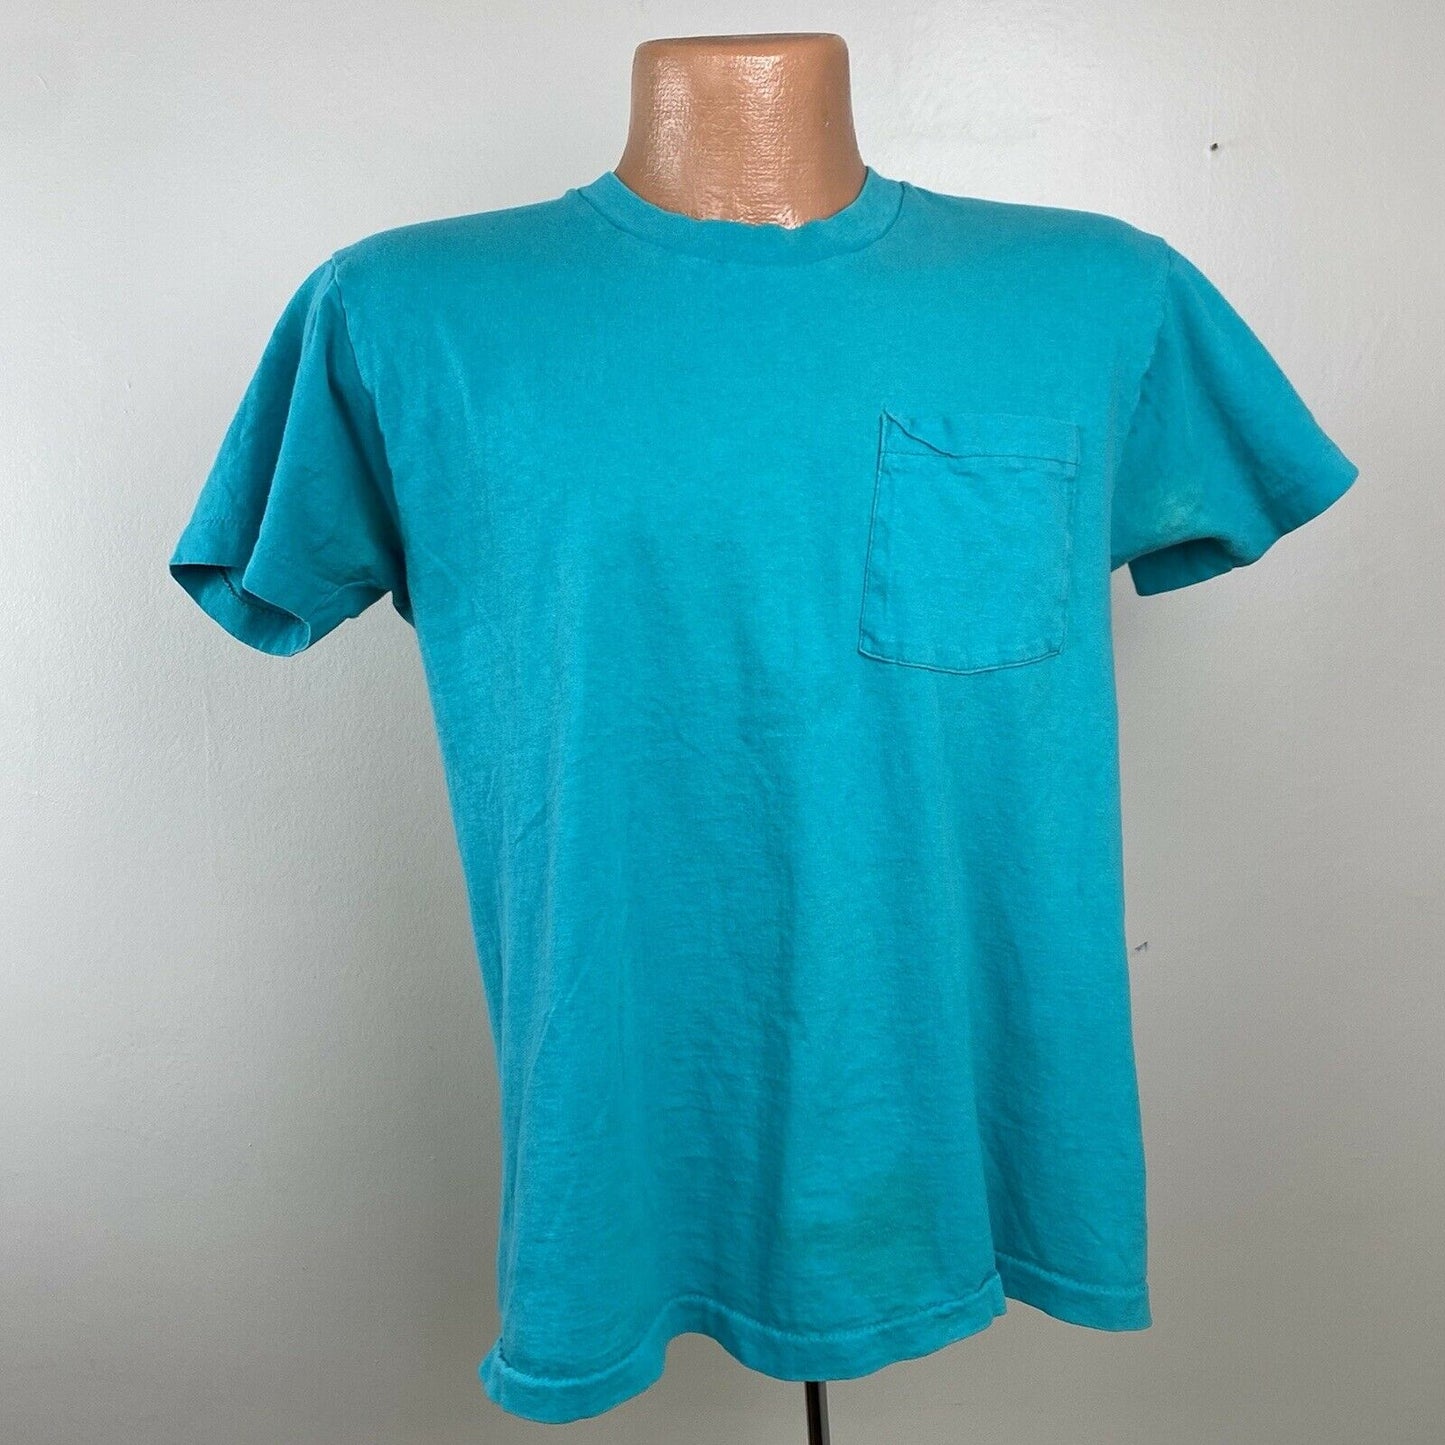 1980s Teal Pocket T-Shirt, Fruit of the Loom Size Medium, Distressed 80s Tee, Single Stitch Blank